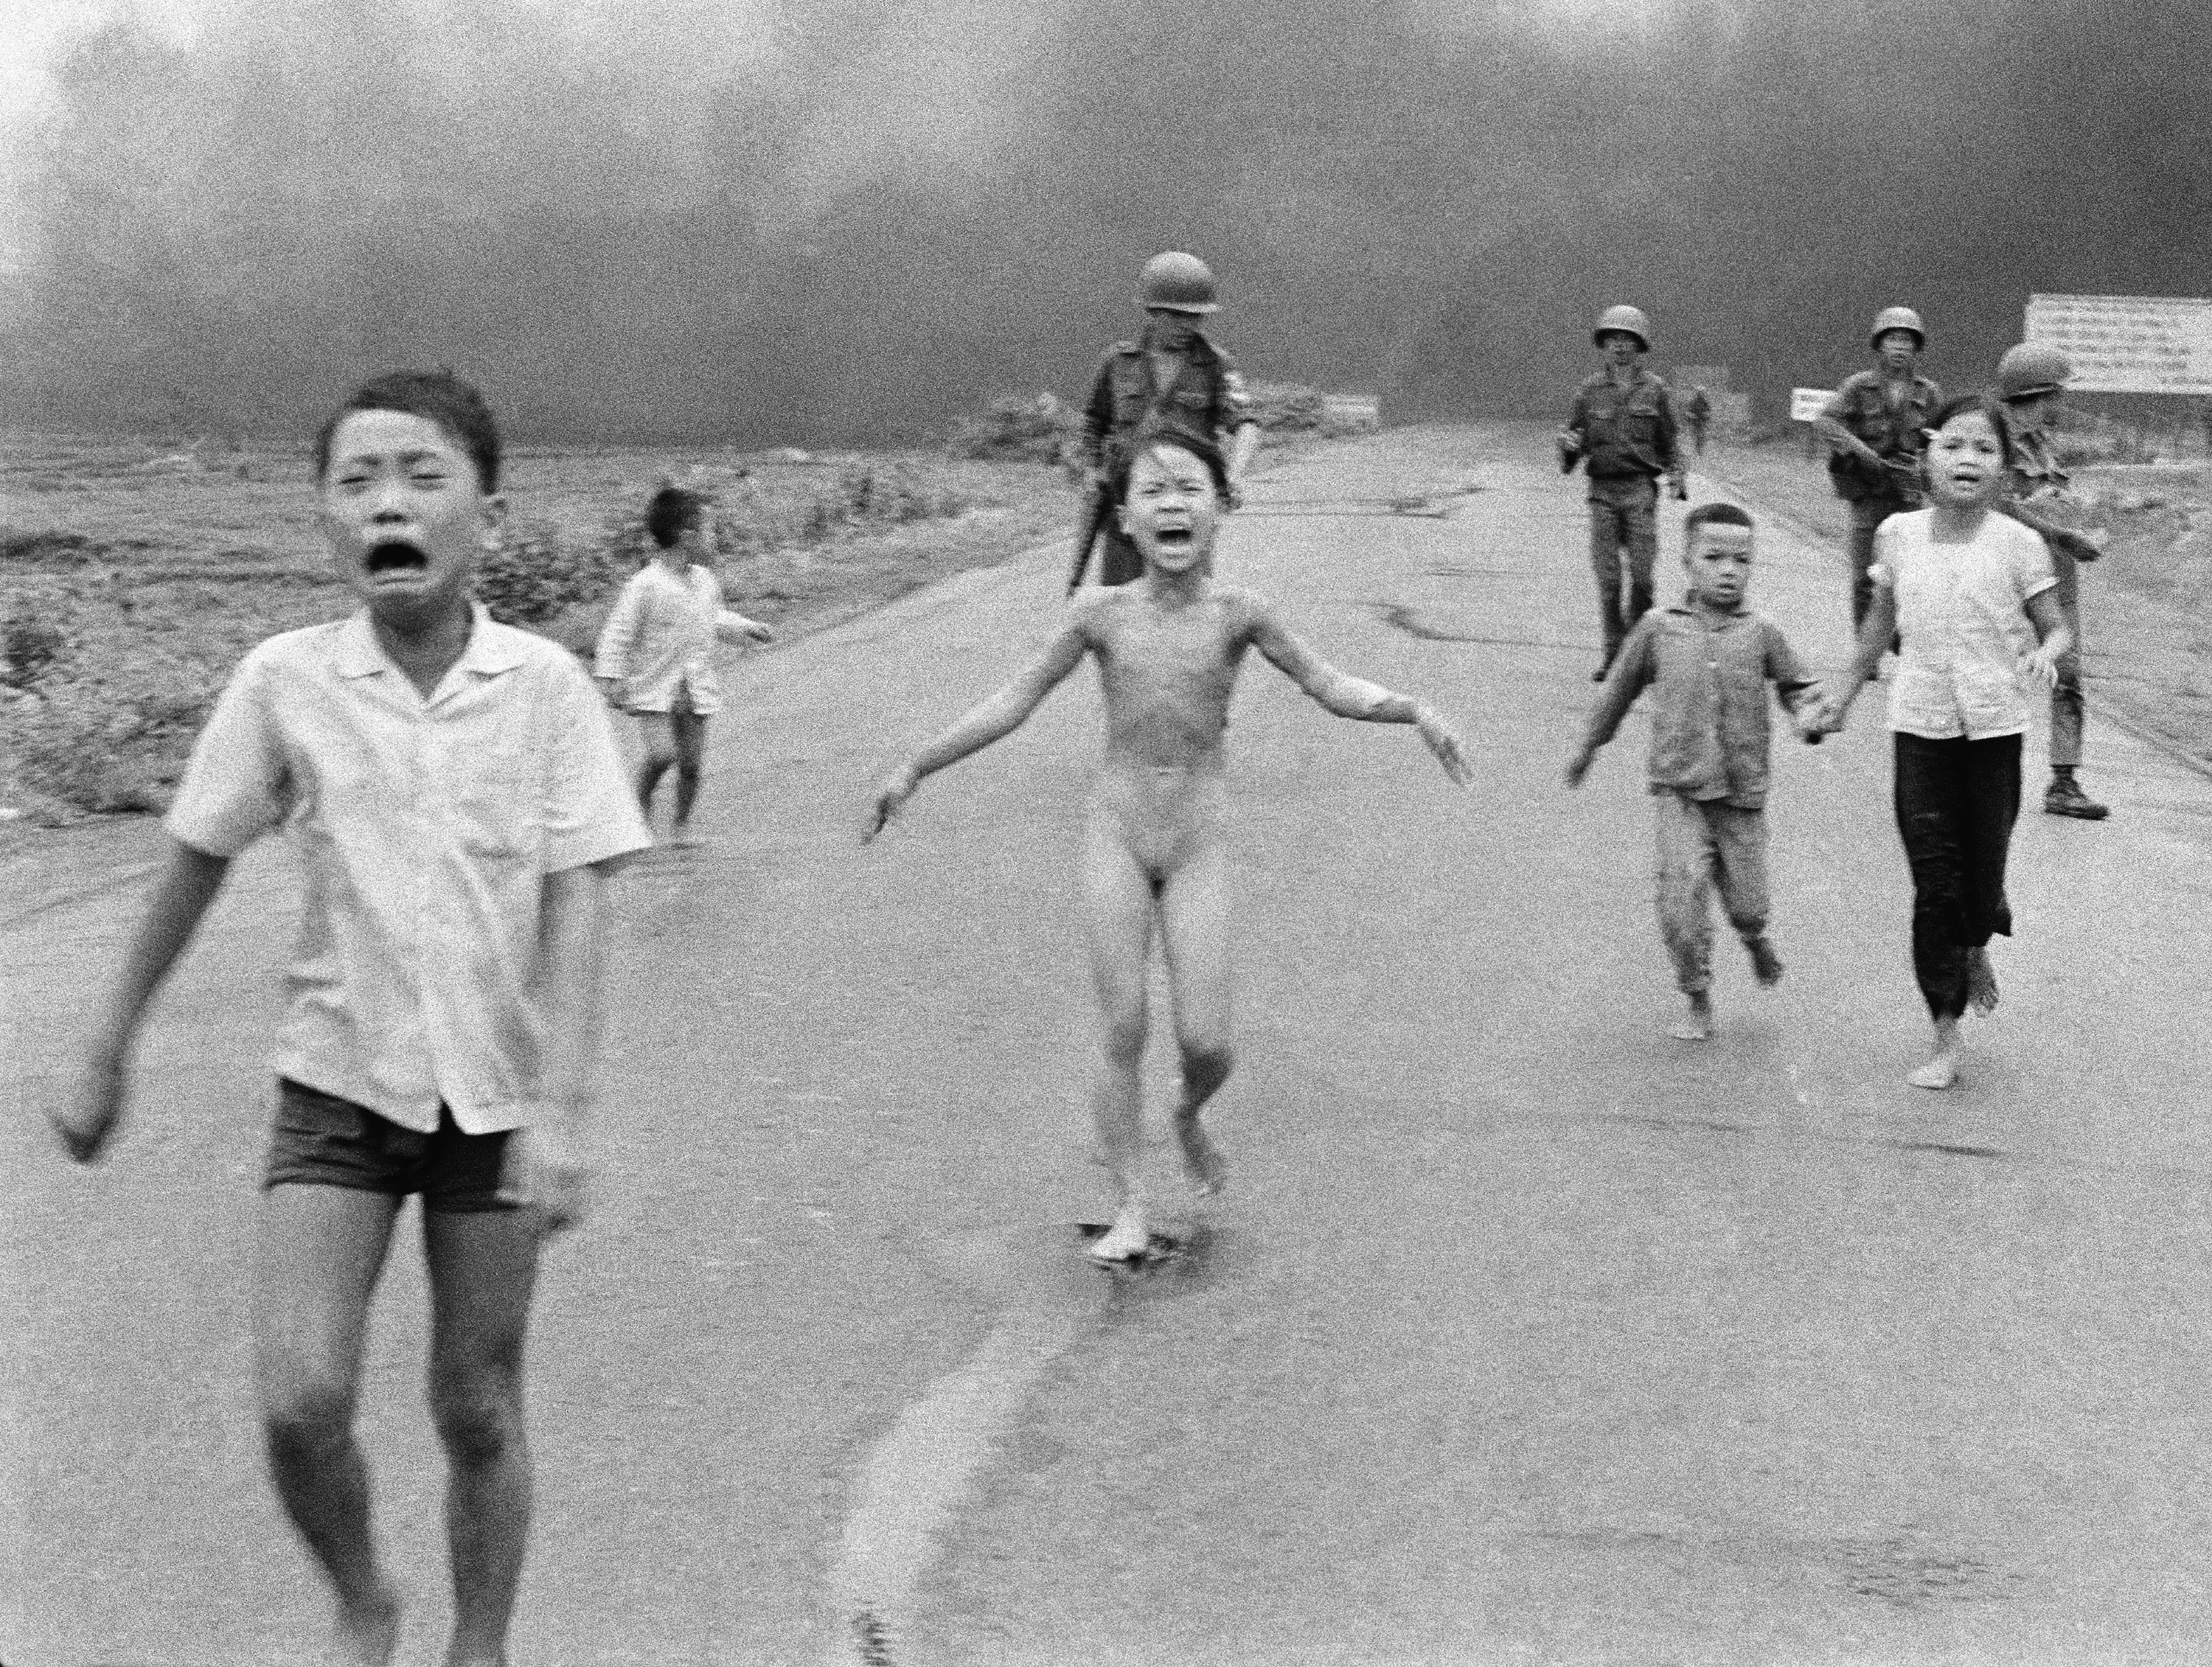 On 9 September 2016, Norway's Prime Minister Erna Solberg challenged Facebook’s restrictions on nude photos by posting this iconic 1972 image of a naked girl running from an aerial napalm attack in Vietnam, AP Photo/Nick Ut, File